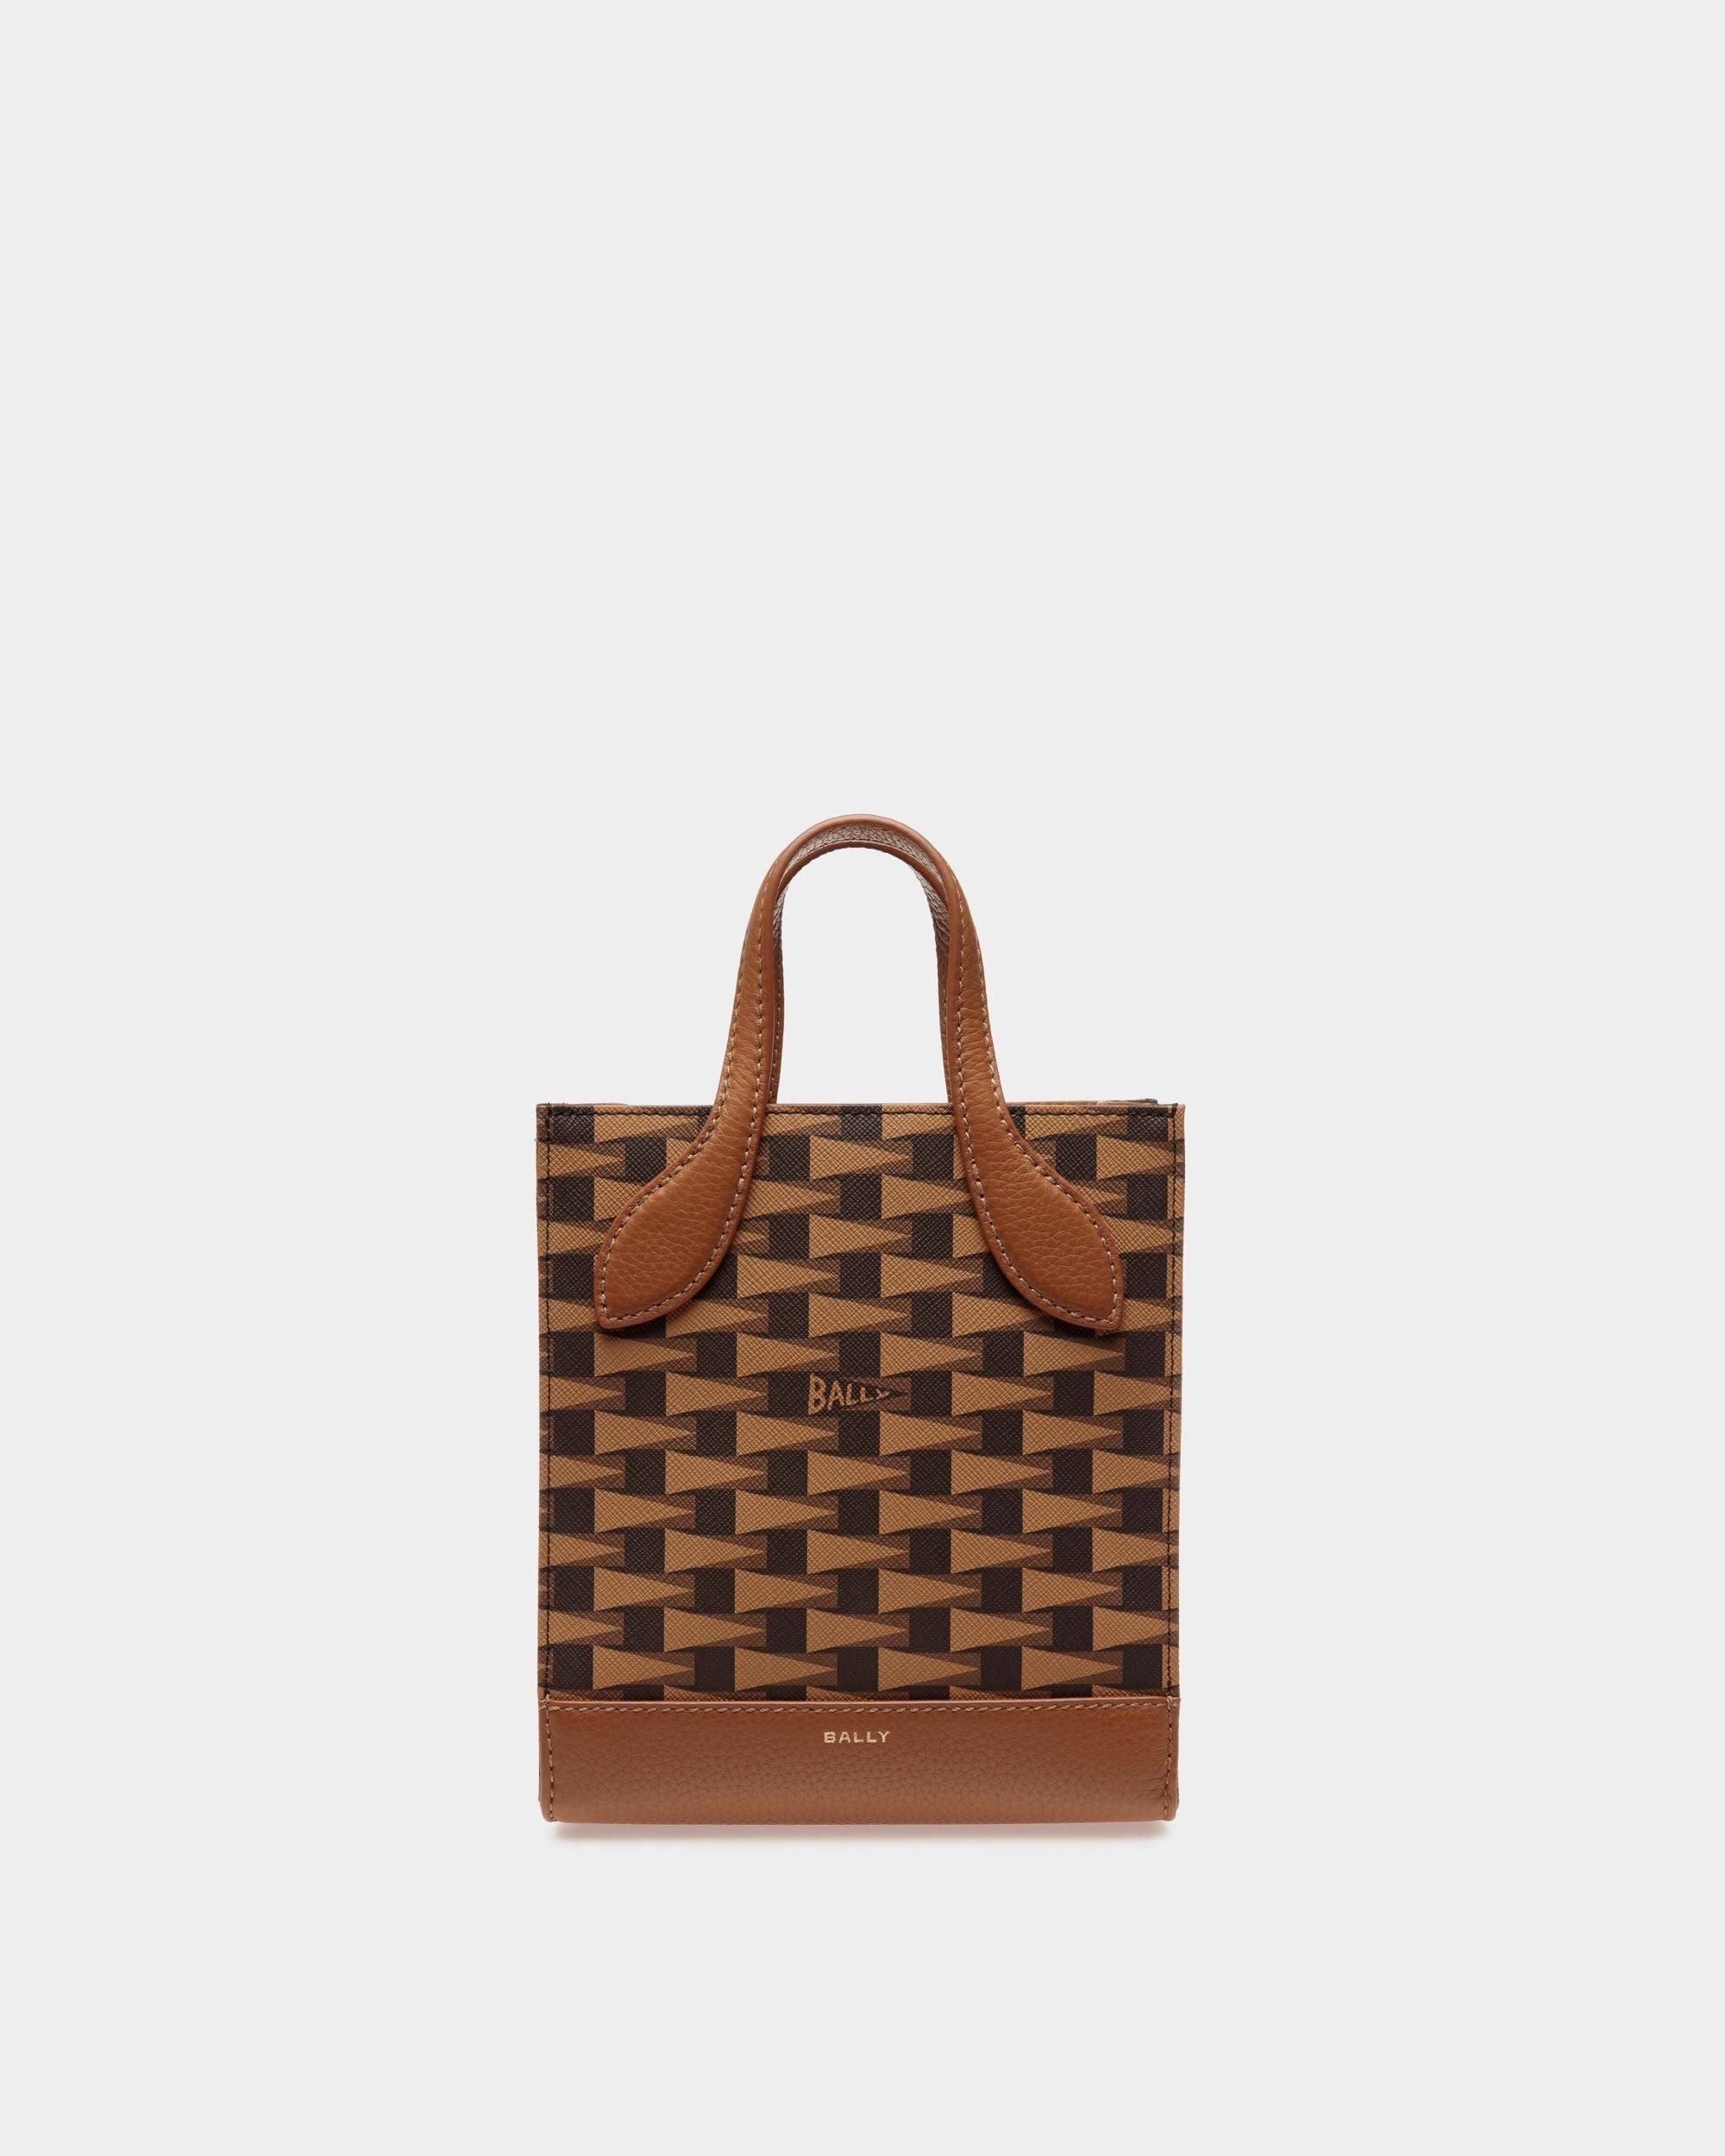 Pennant | Women's Mini Tote Bag in Brown Pennant Motif TPU | Bally | Still Life Front